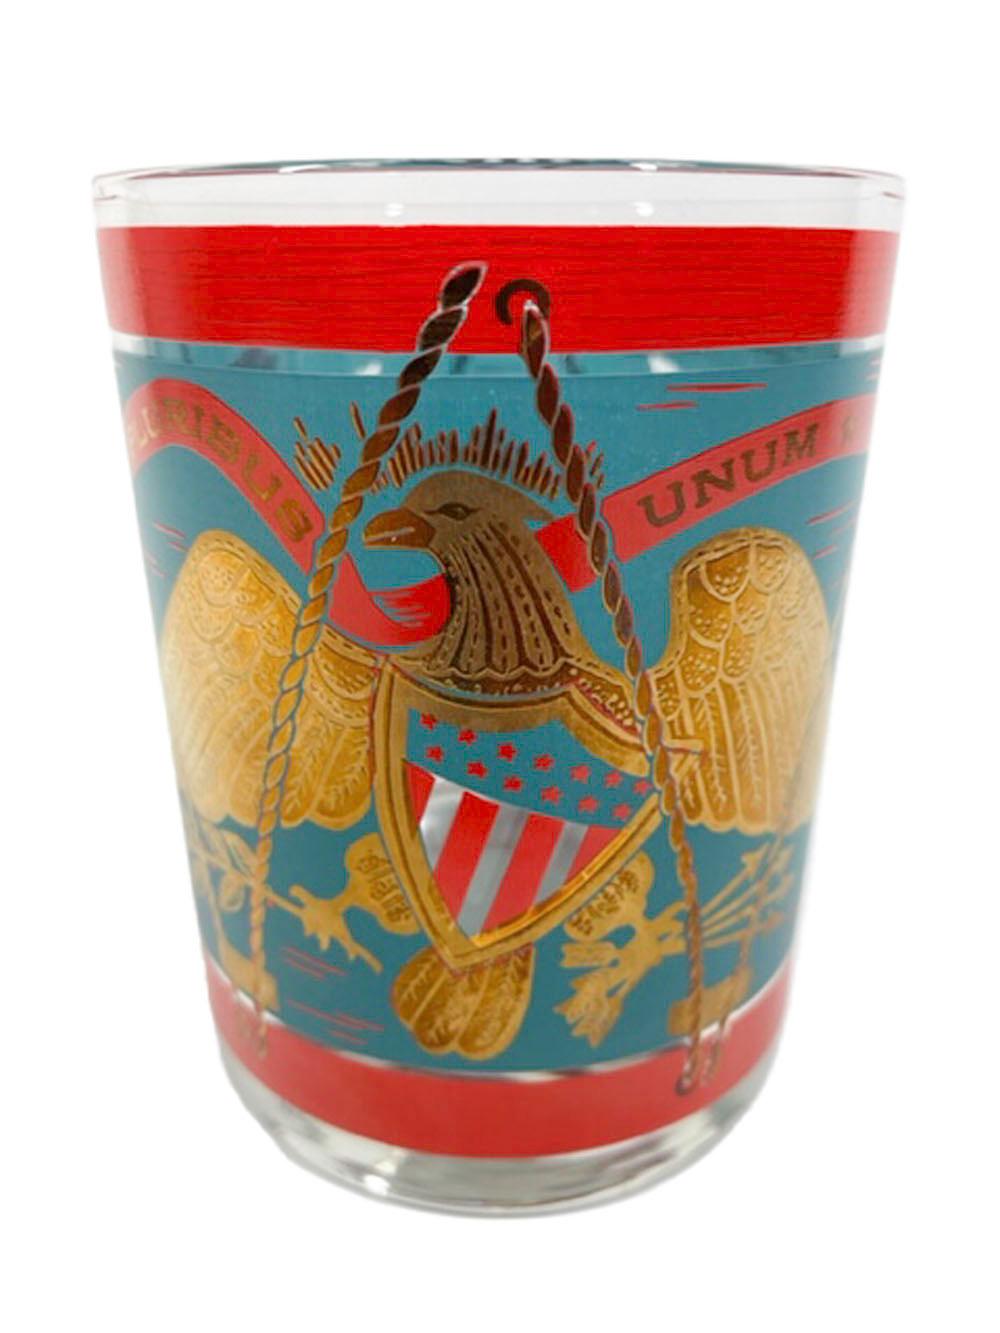 Set of 6 vintage rocks glasses by Cera Glassware in teal and red enamel with 22k gold - decorated as a parade drum with a spread-winged eagle on the front and a shield on the back.